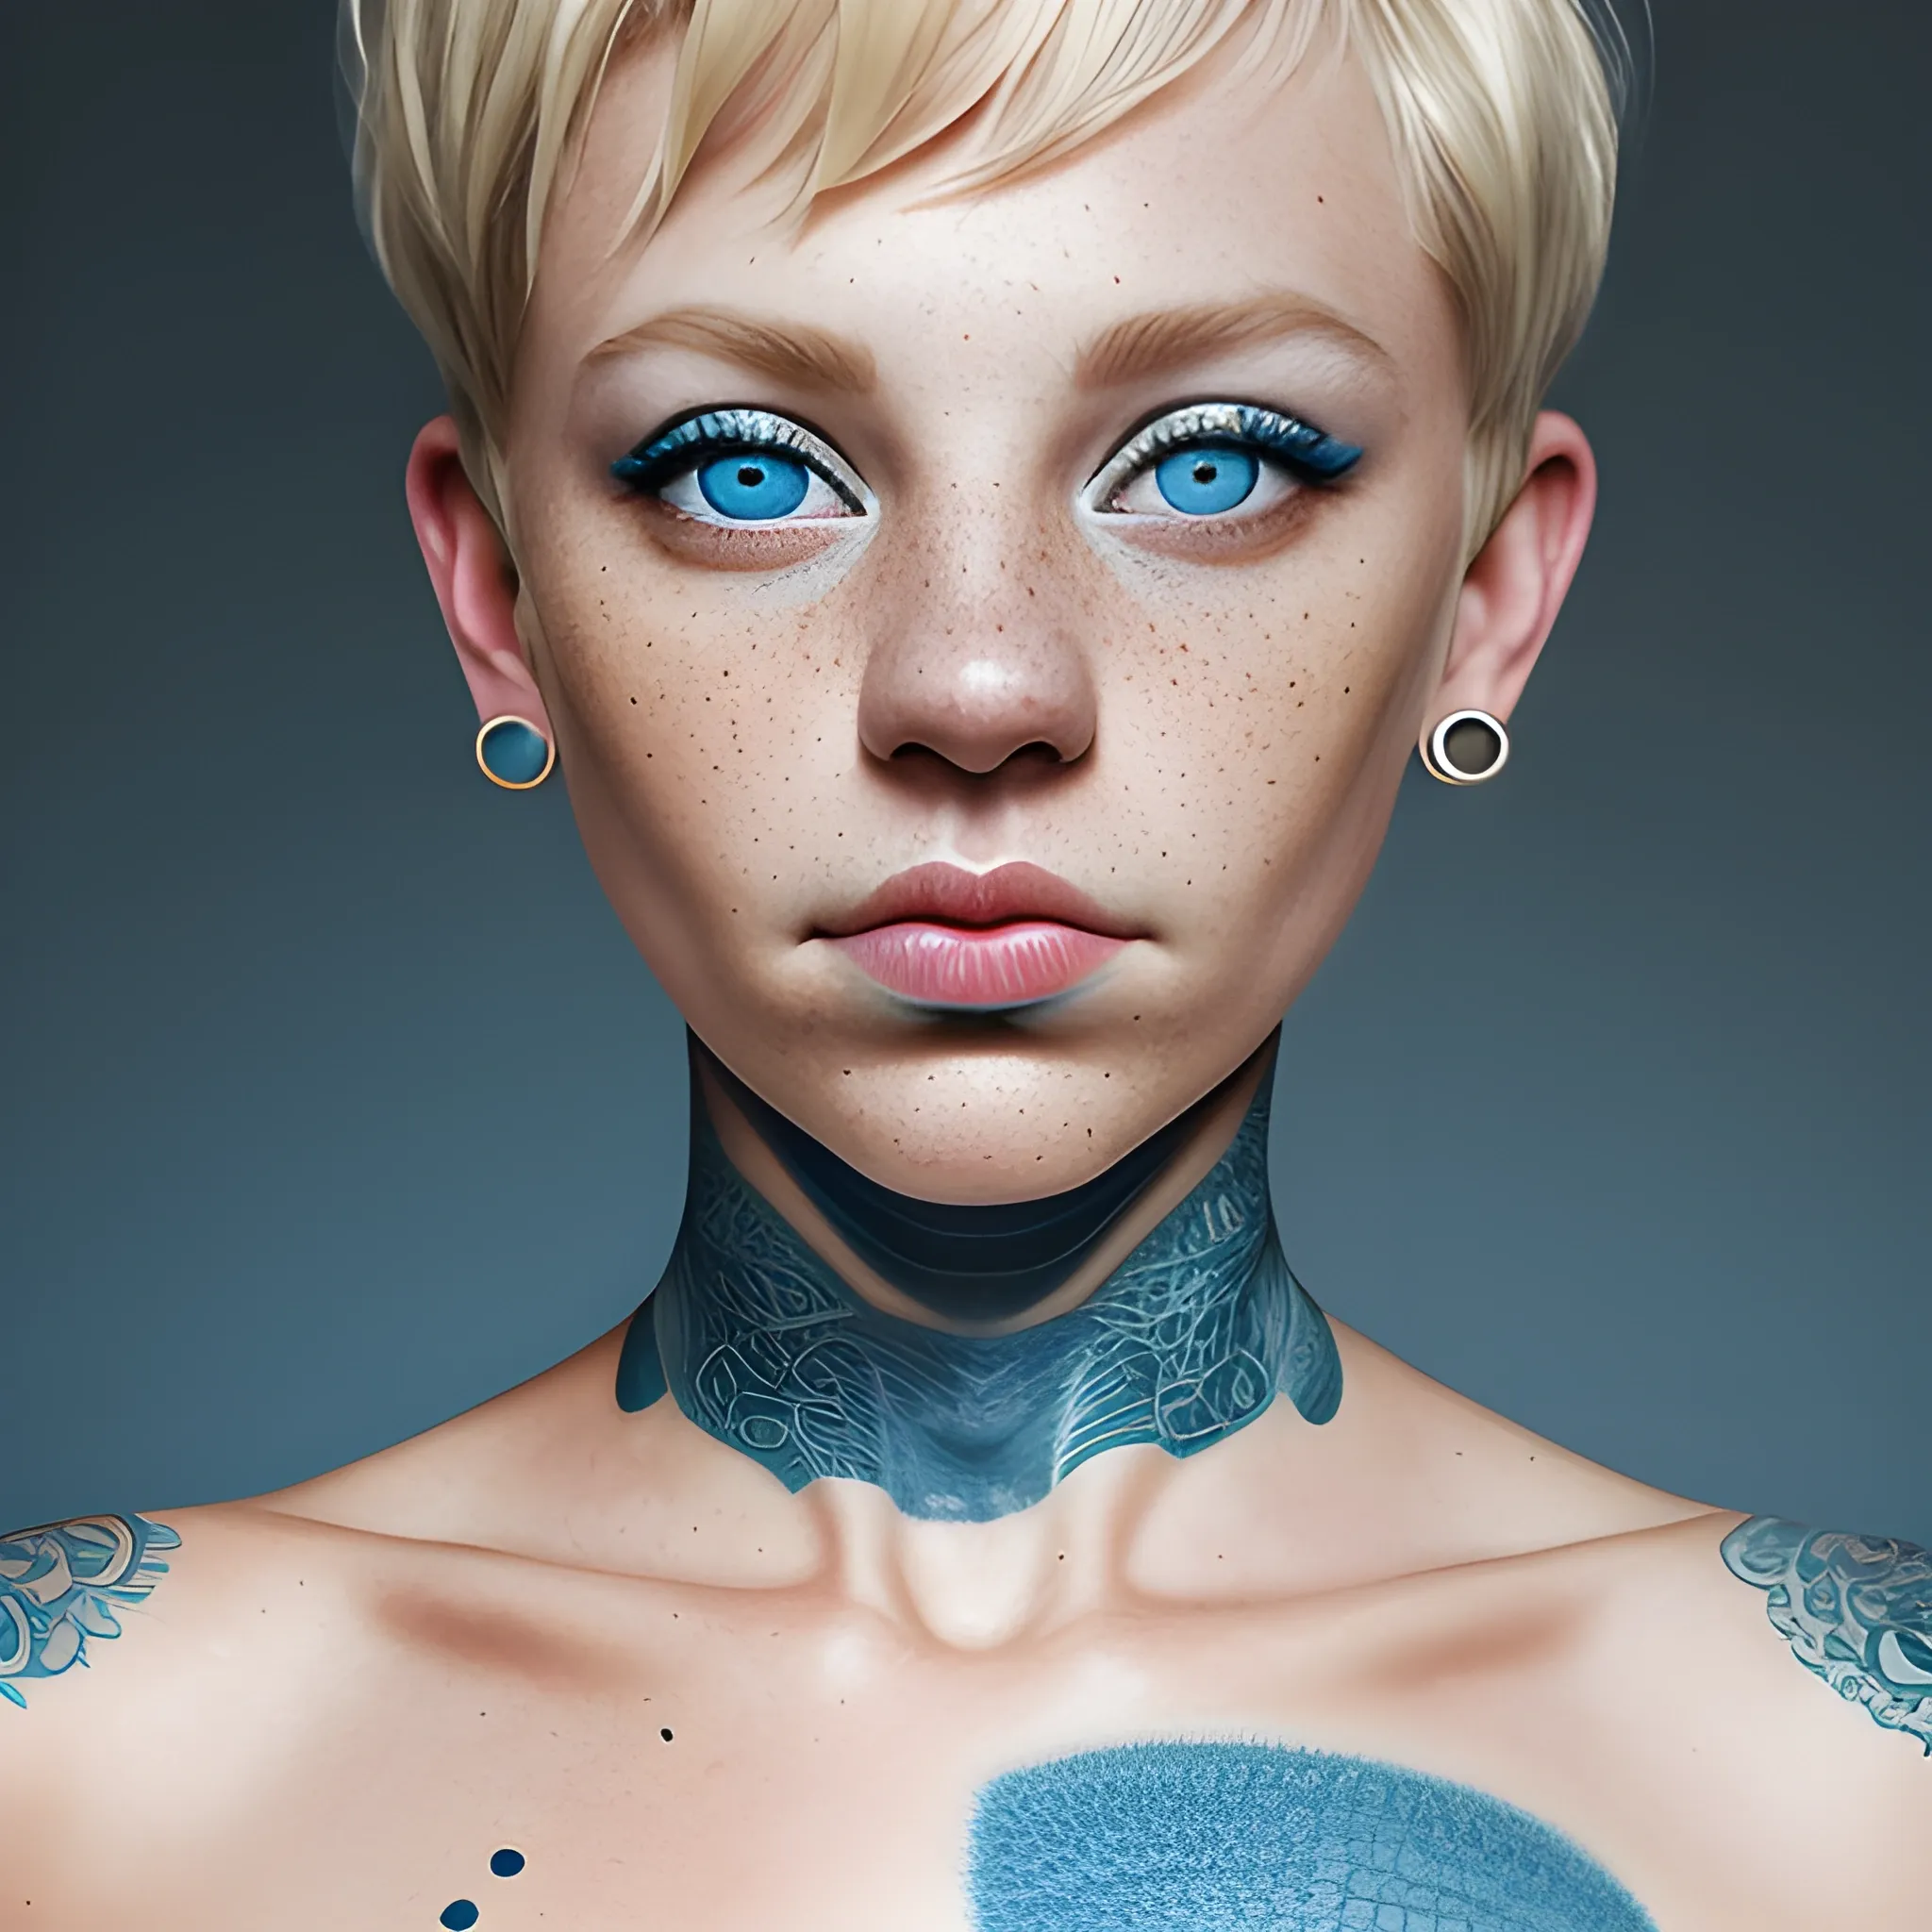 A woman with short blonde hair, septum ring, blue eyes portrait, round nose, freckles goddess